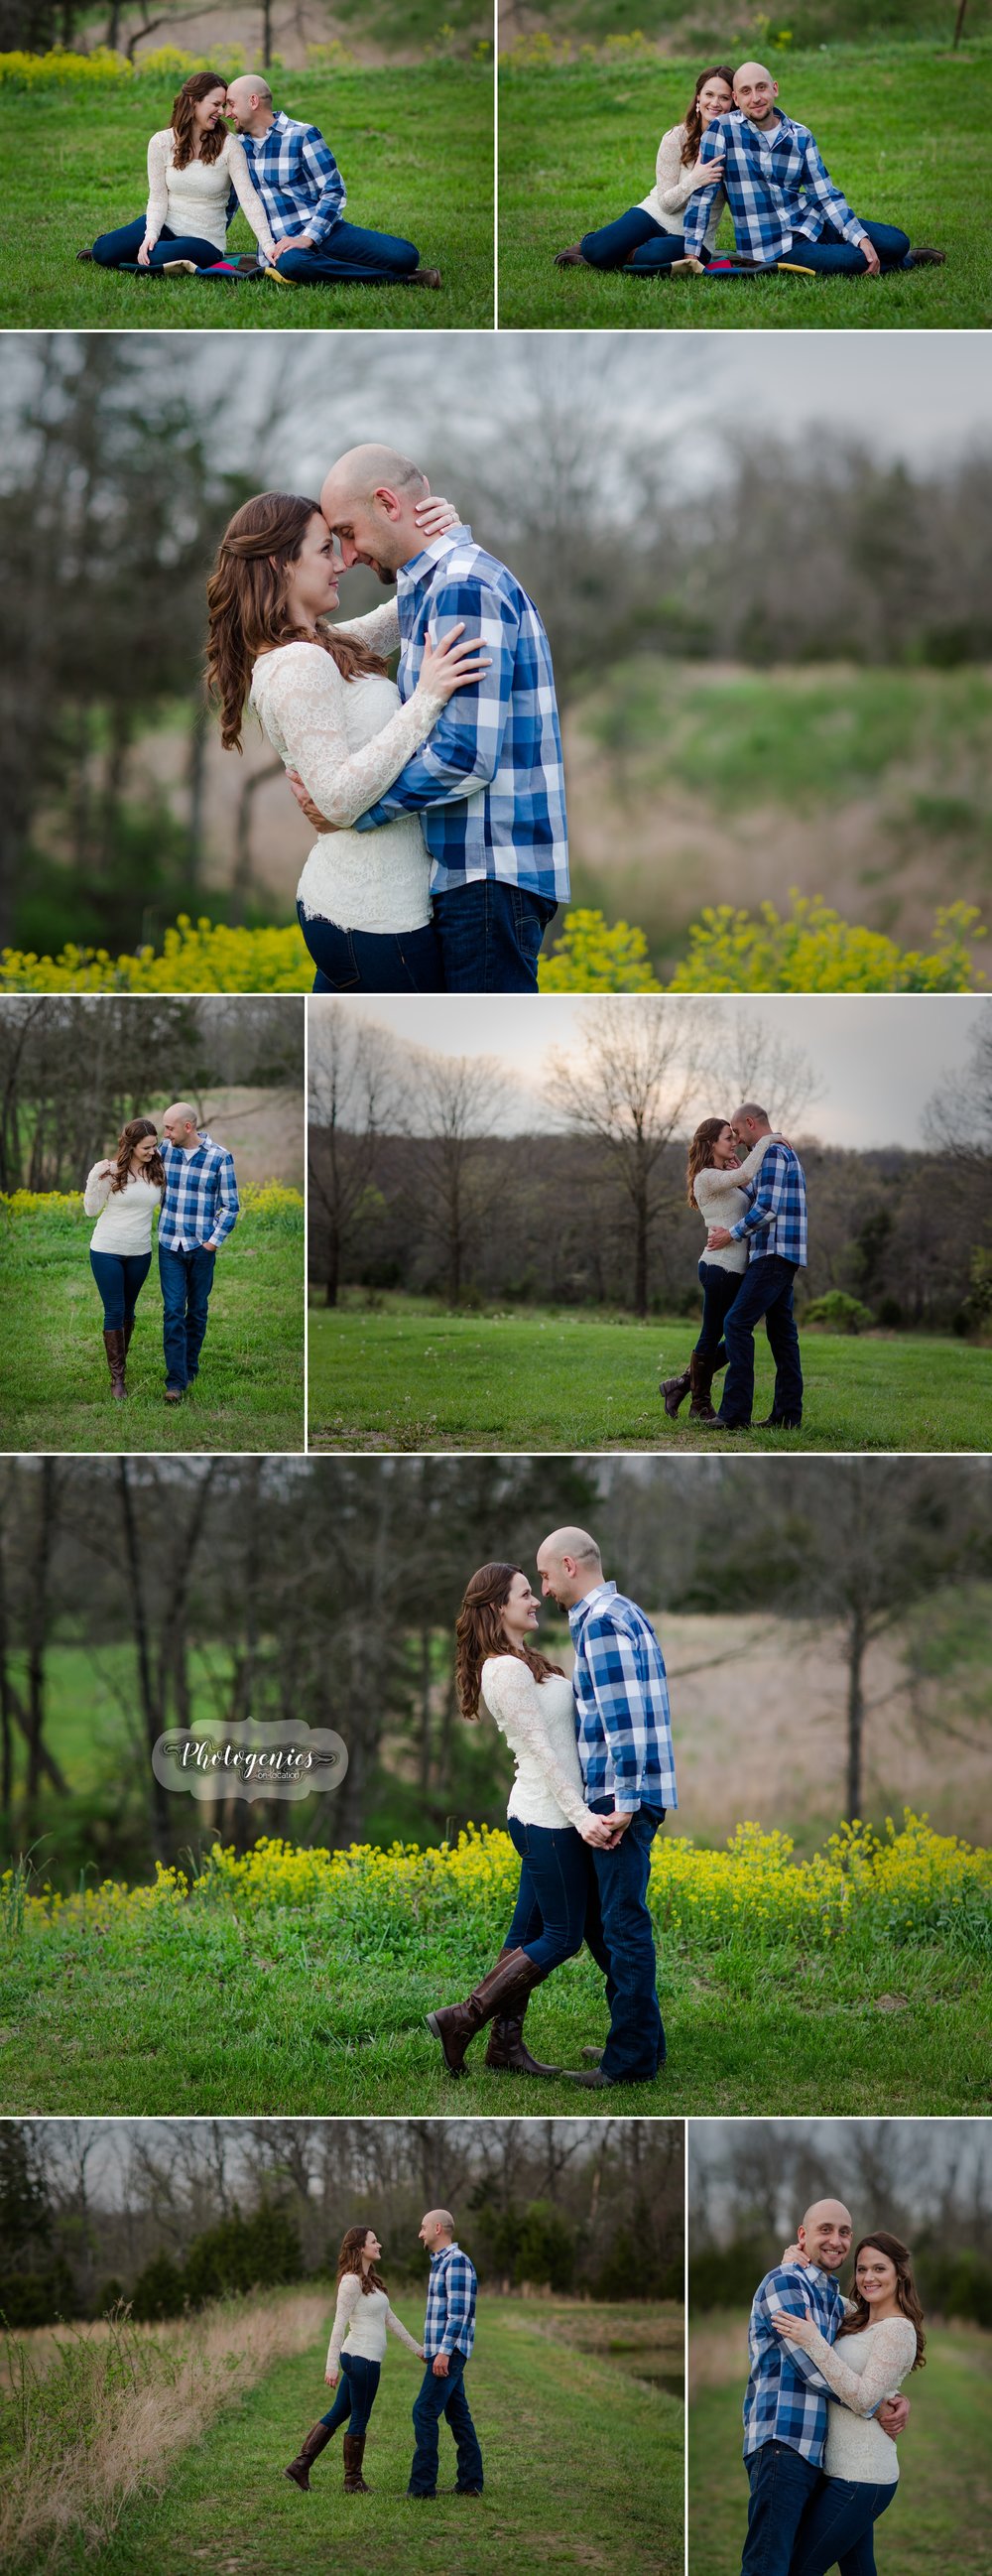  engagement_session_spring_country_creek_water_poses_evening_light_lake_sunset_ideas_simple_variety_unique 1 